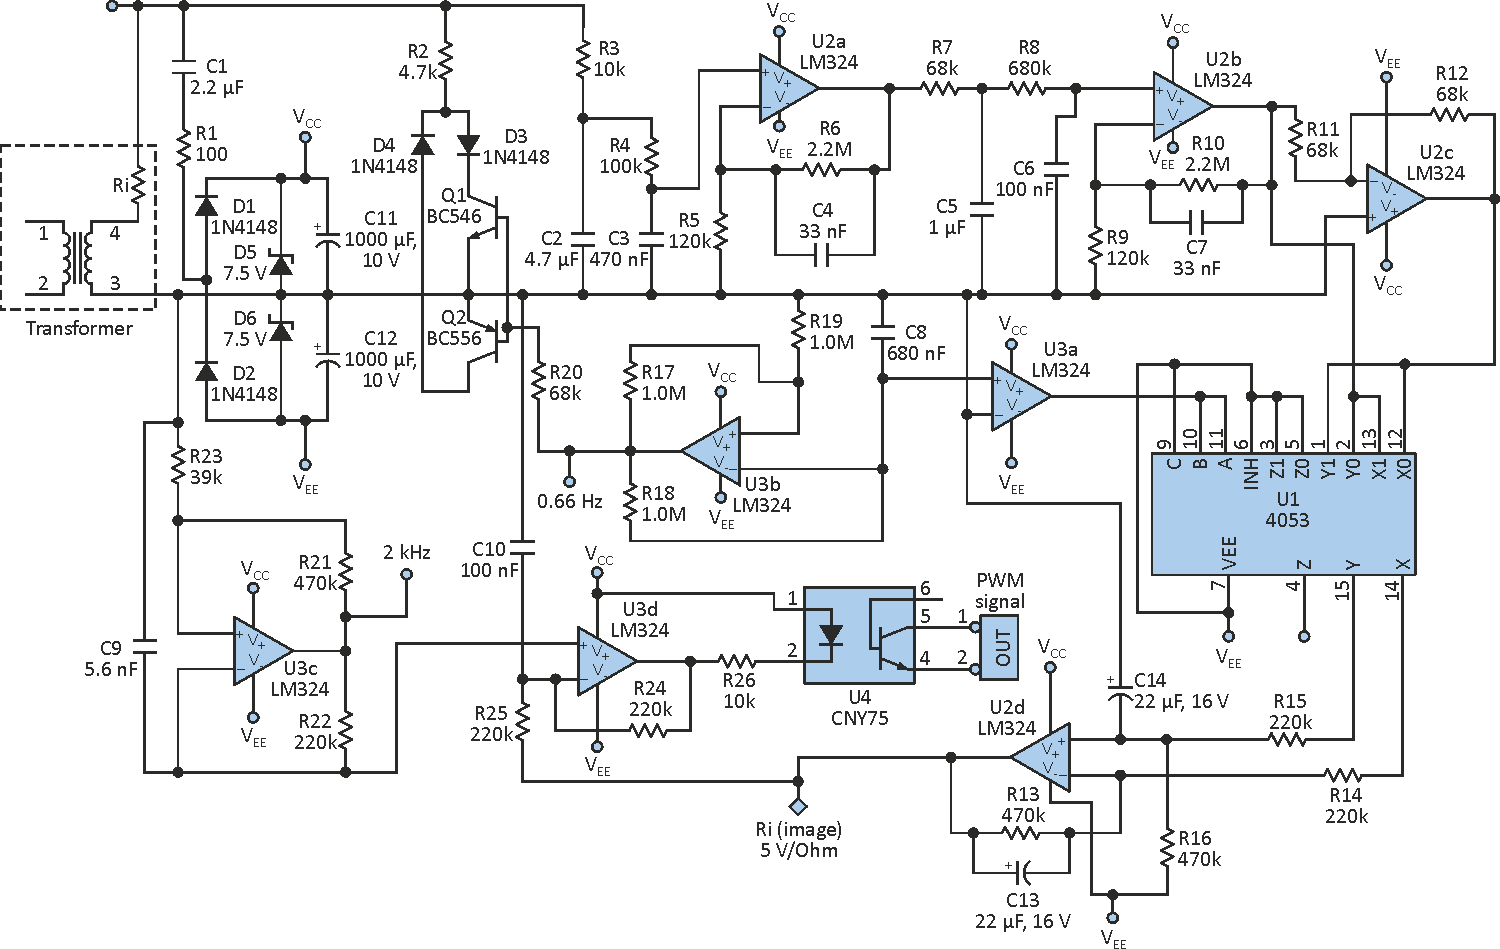 Monitor Transformer Winding's Temperature Without A Sensor